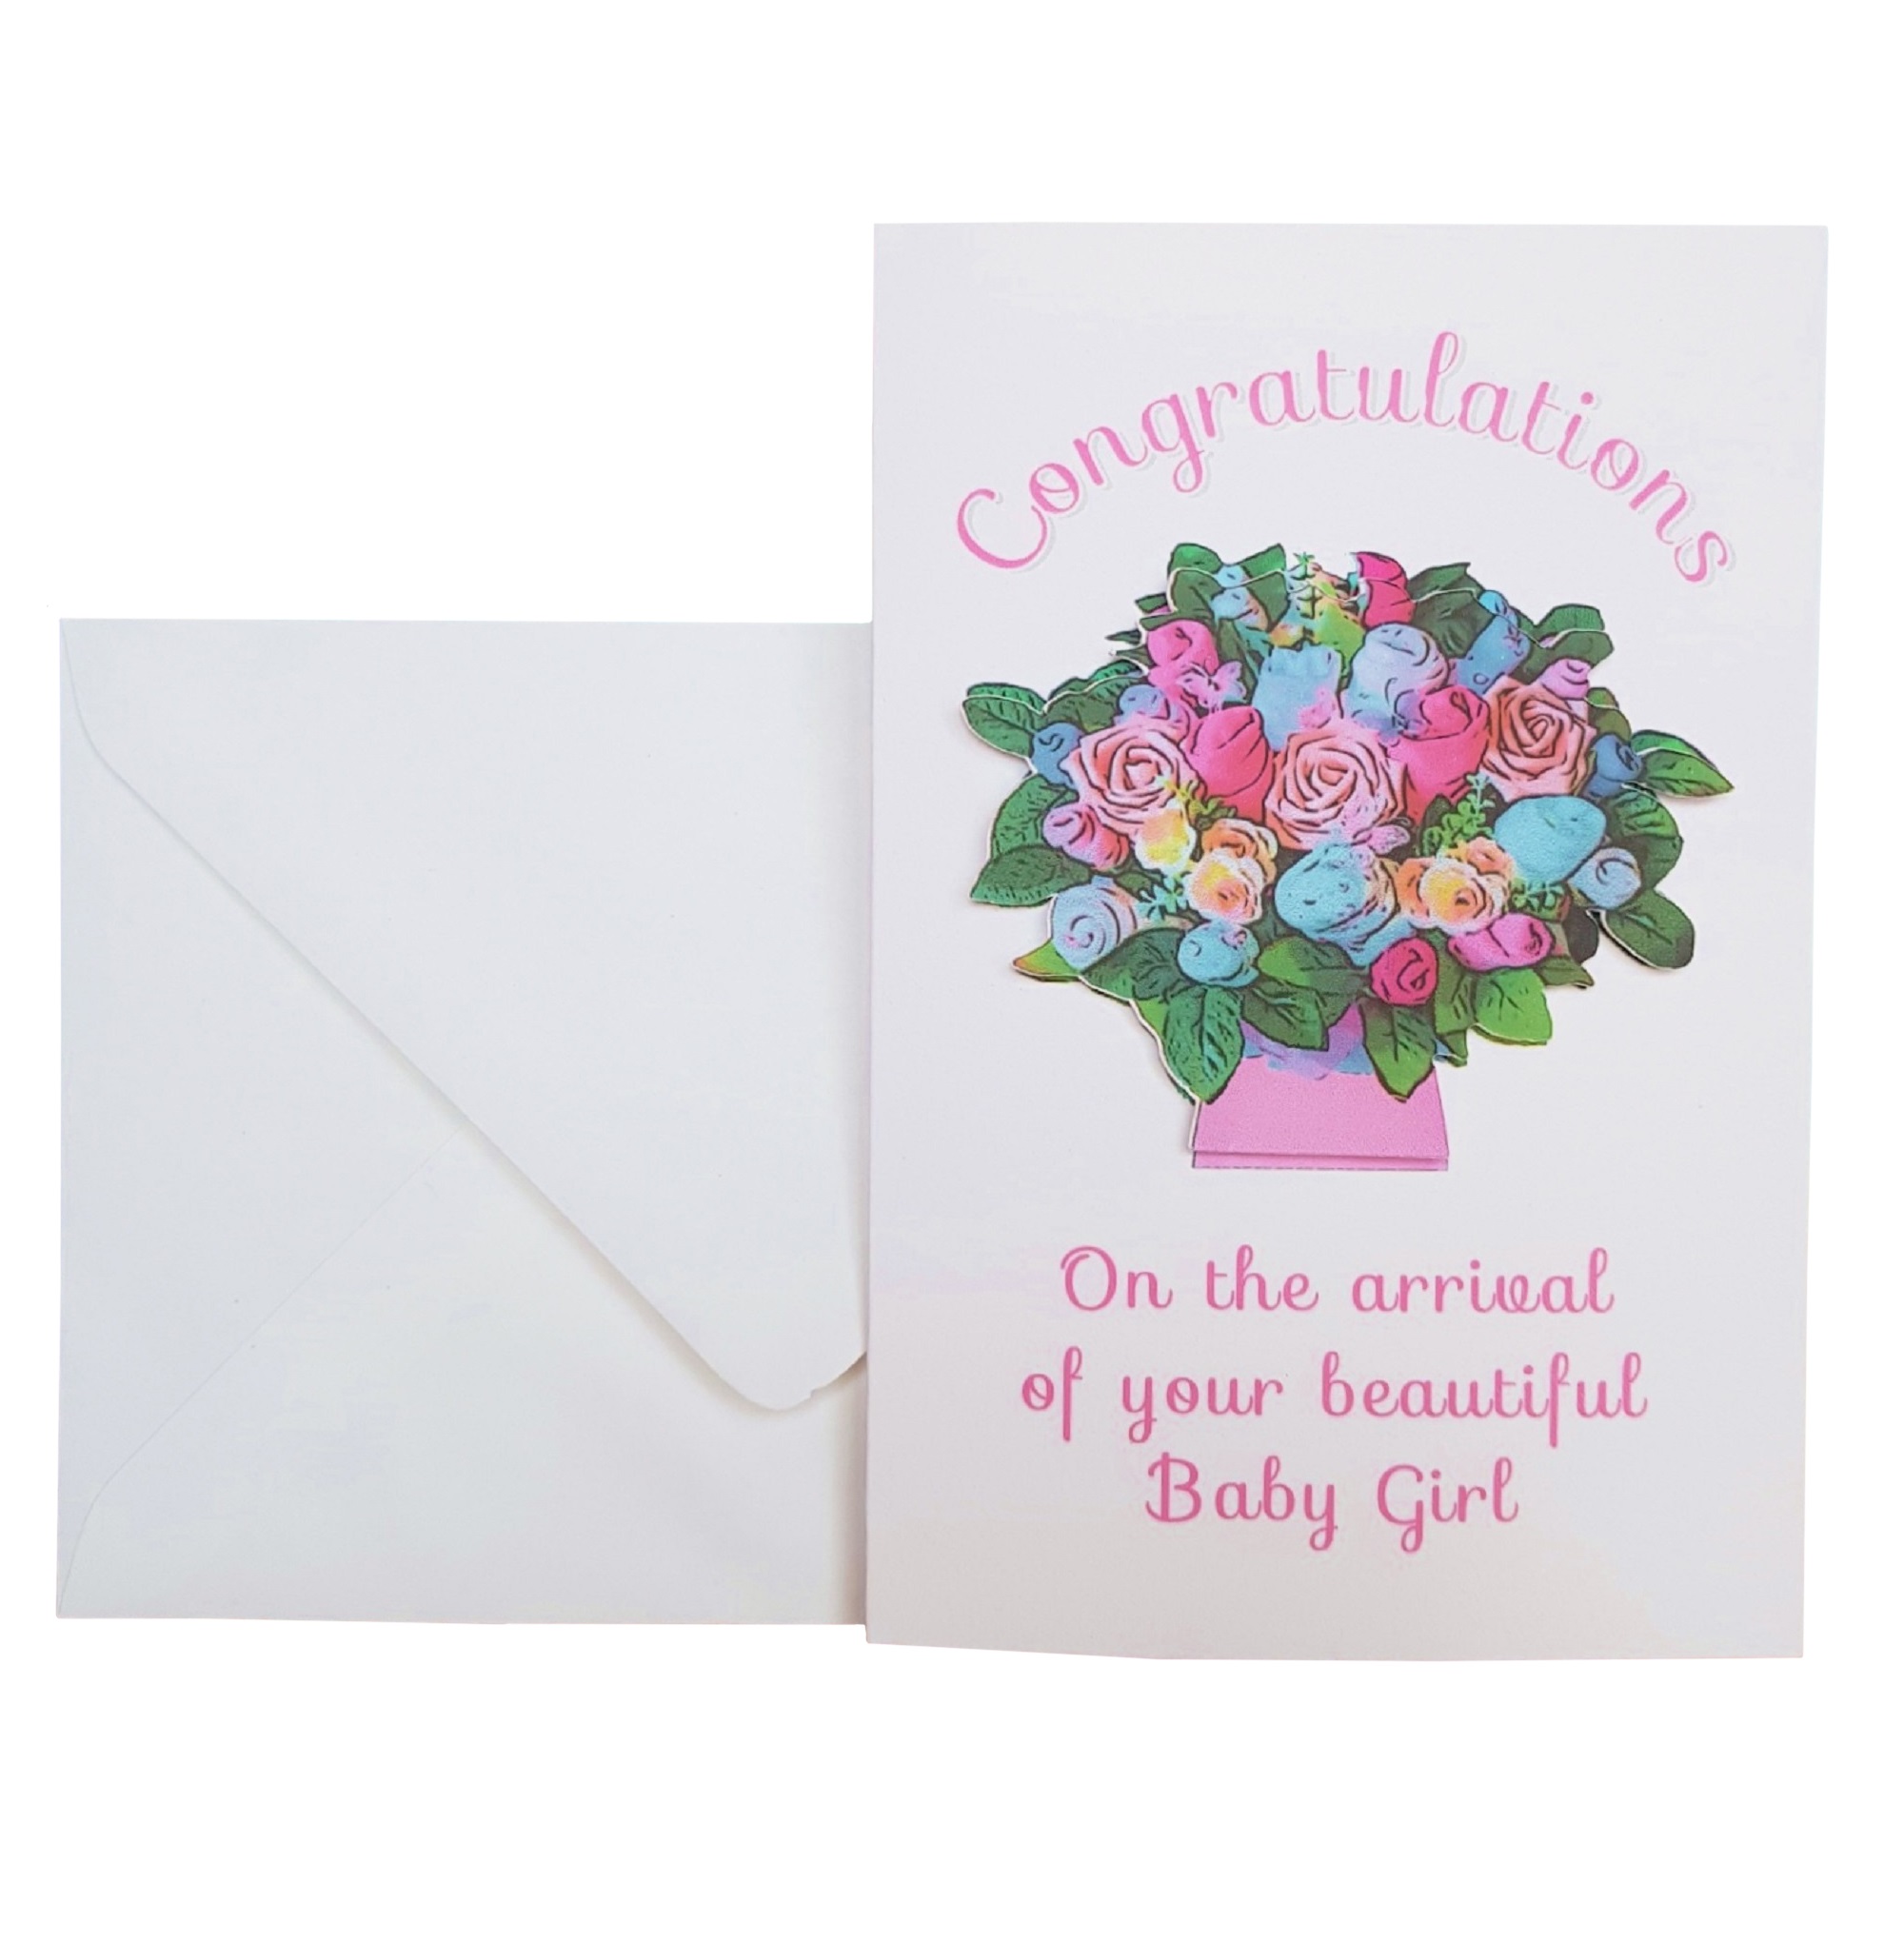 Congratulations - On the arrival of your beautiful Baby Girl